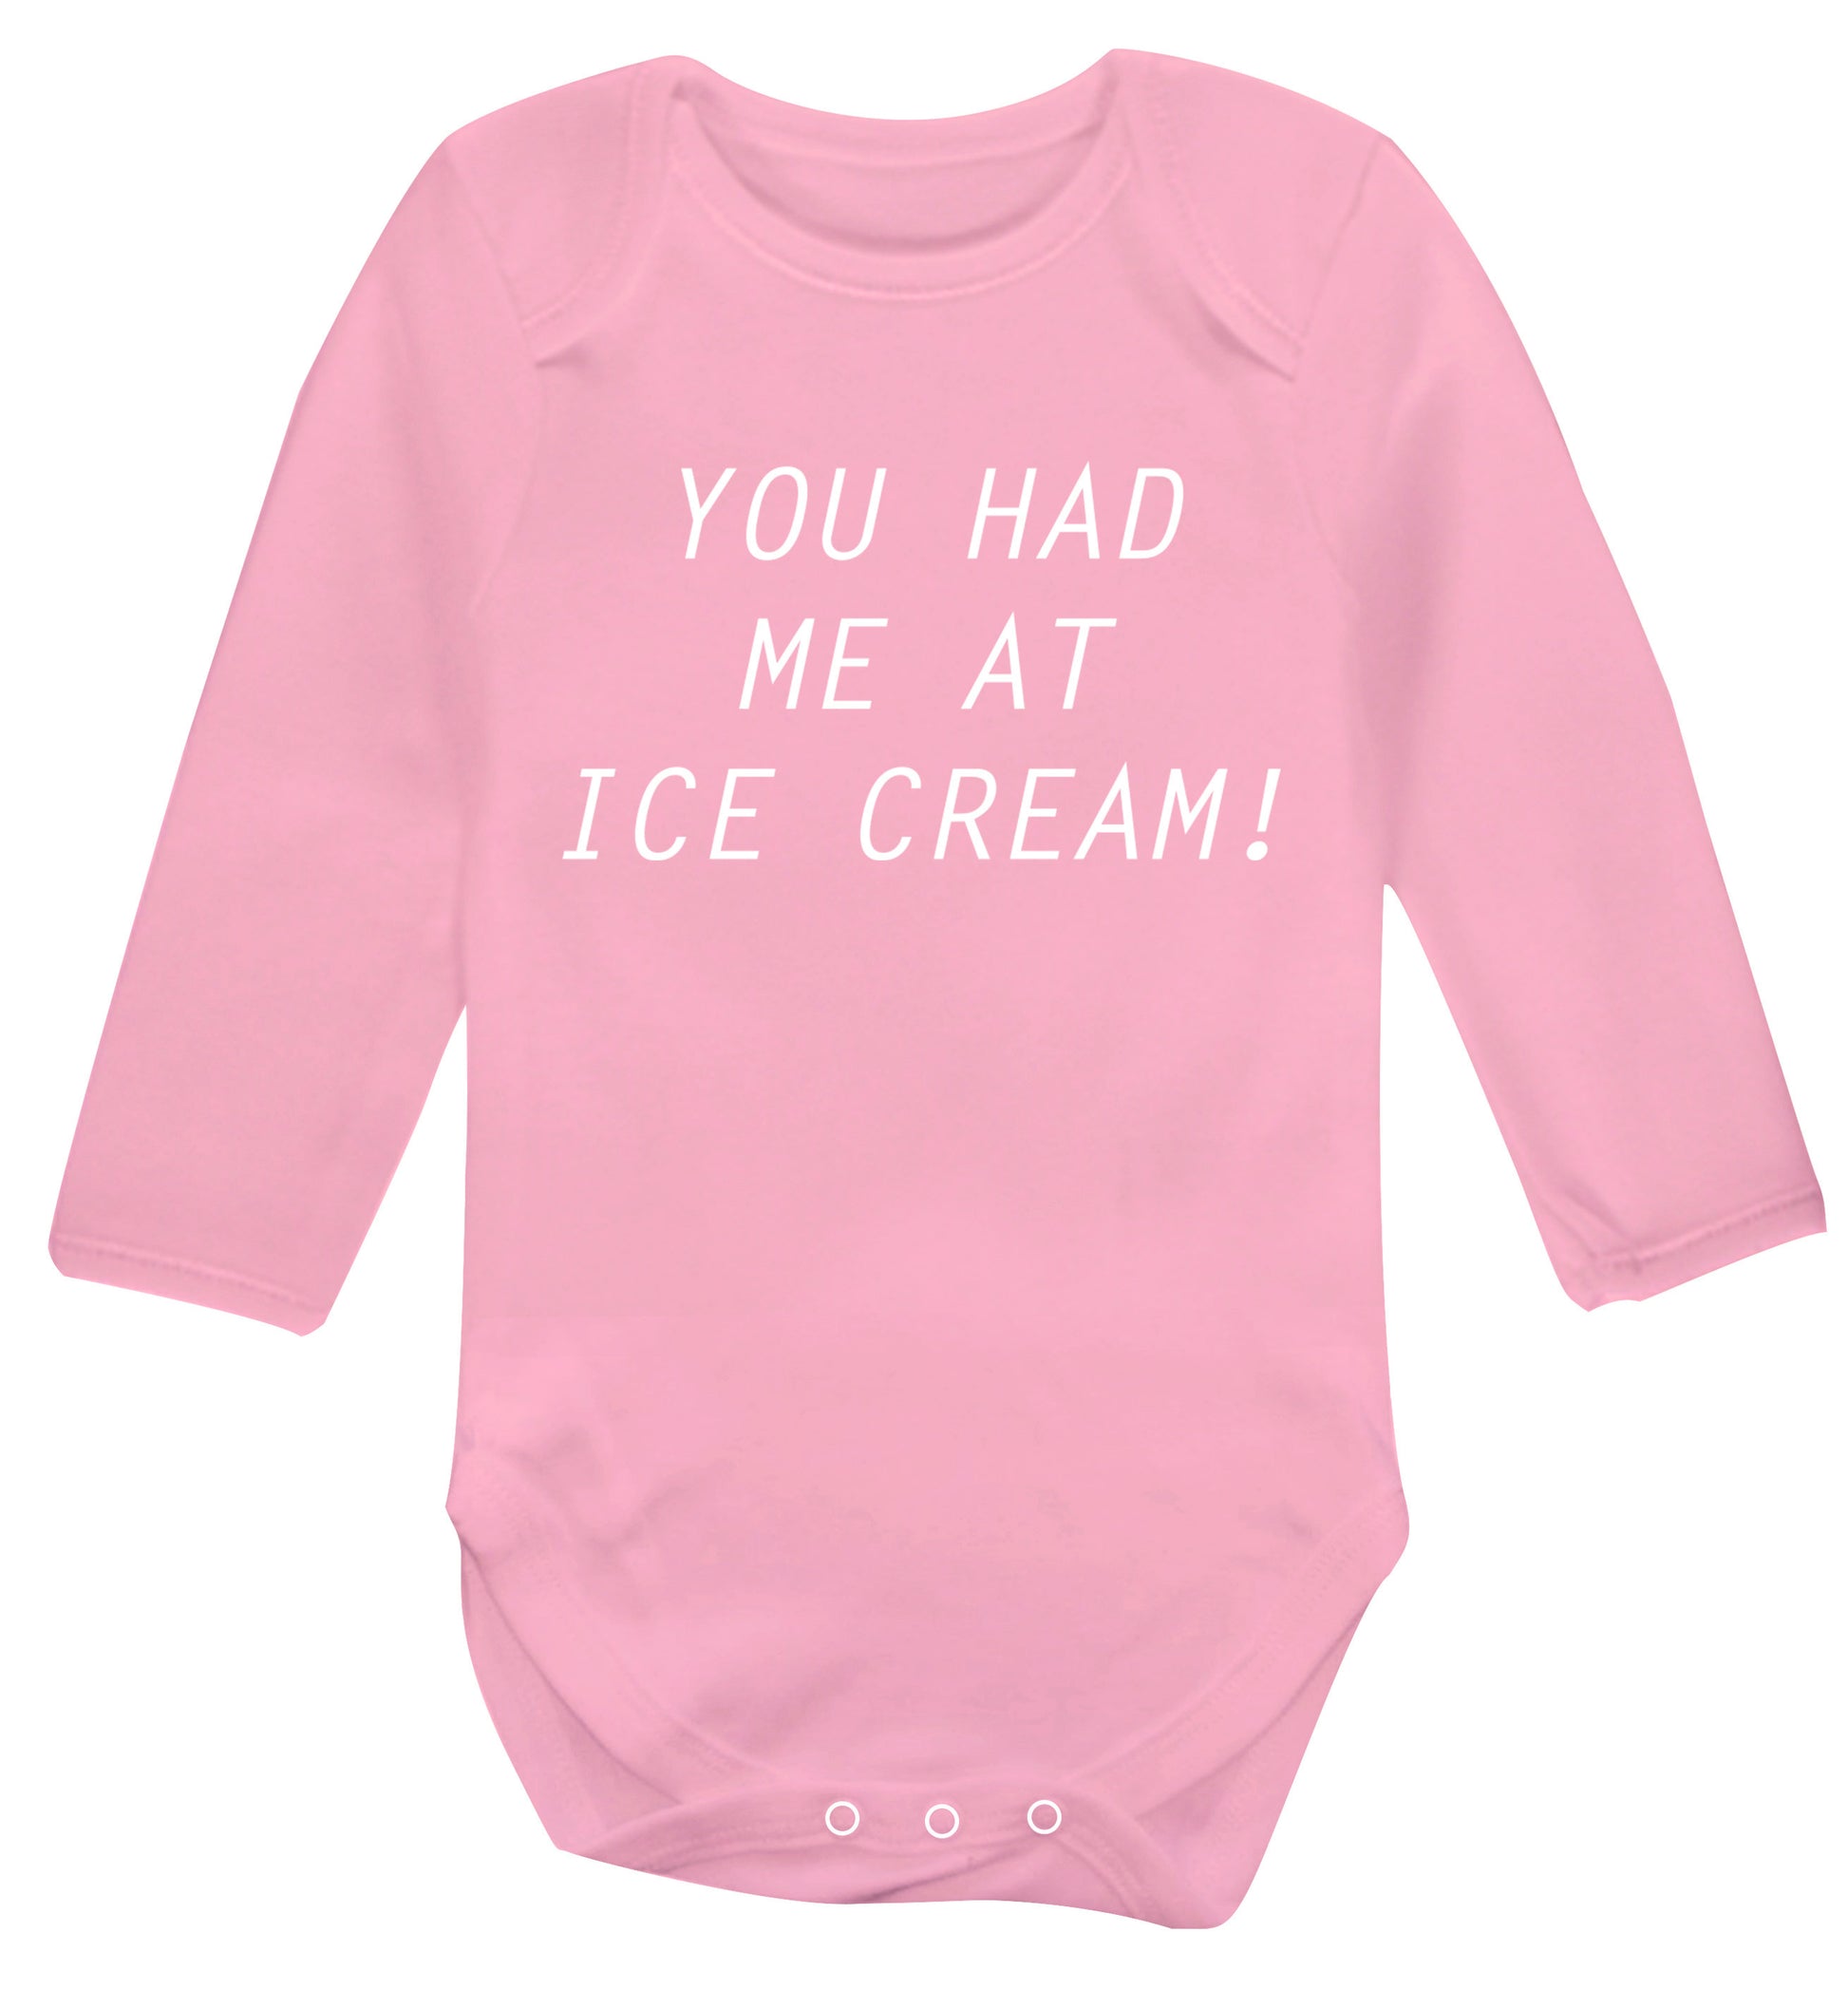 You had me at ice cream Baby Vest long sleeved pale pink 6-12 months